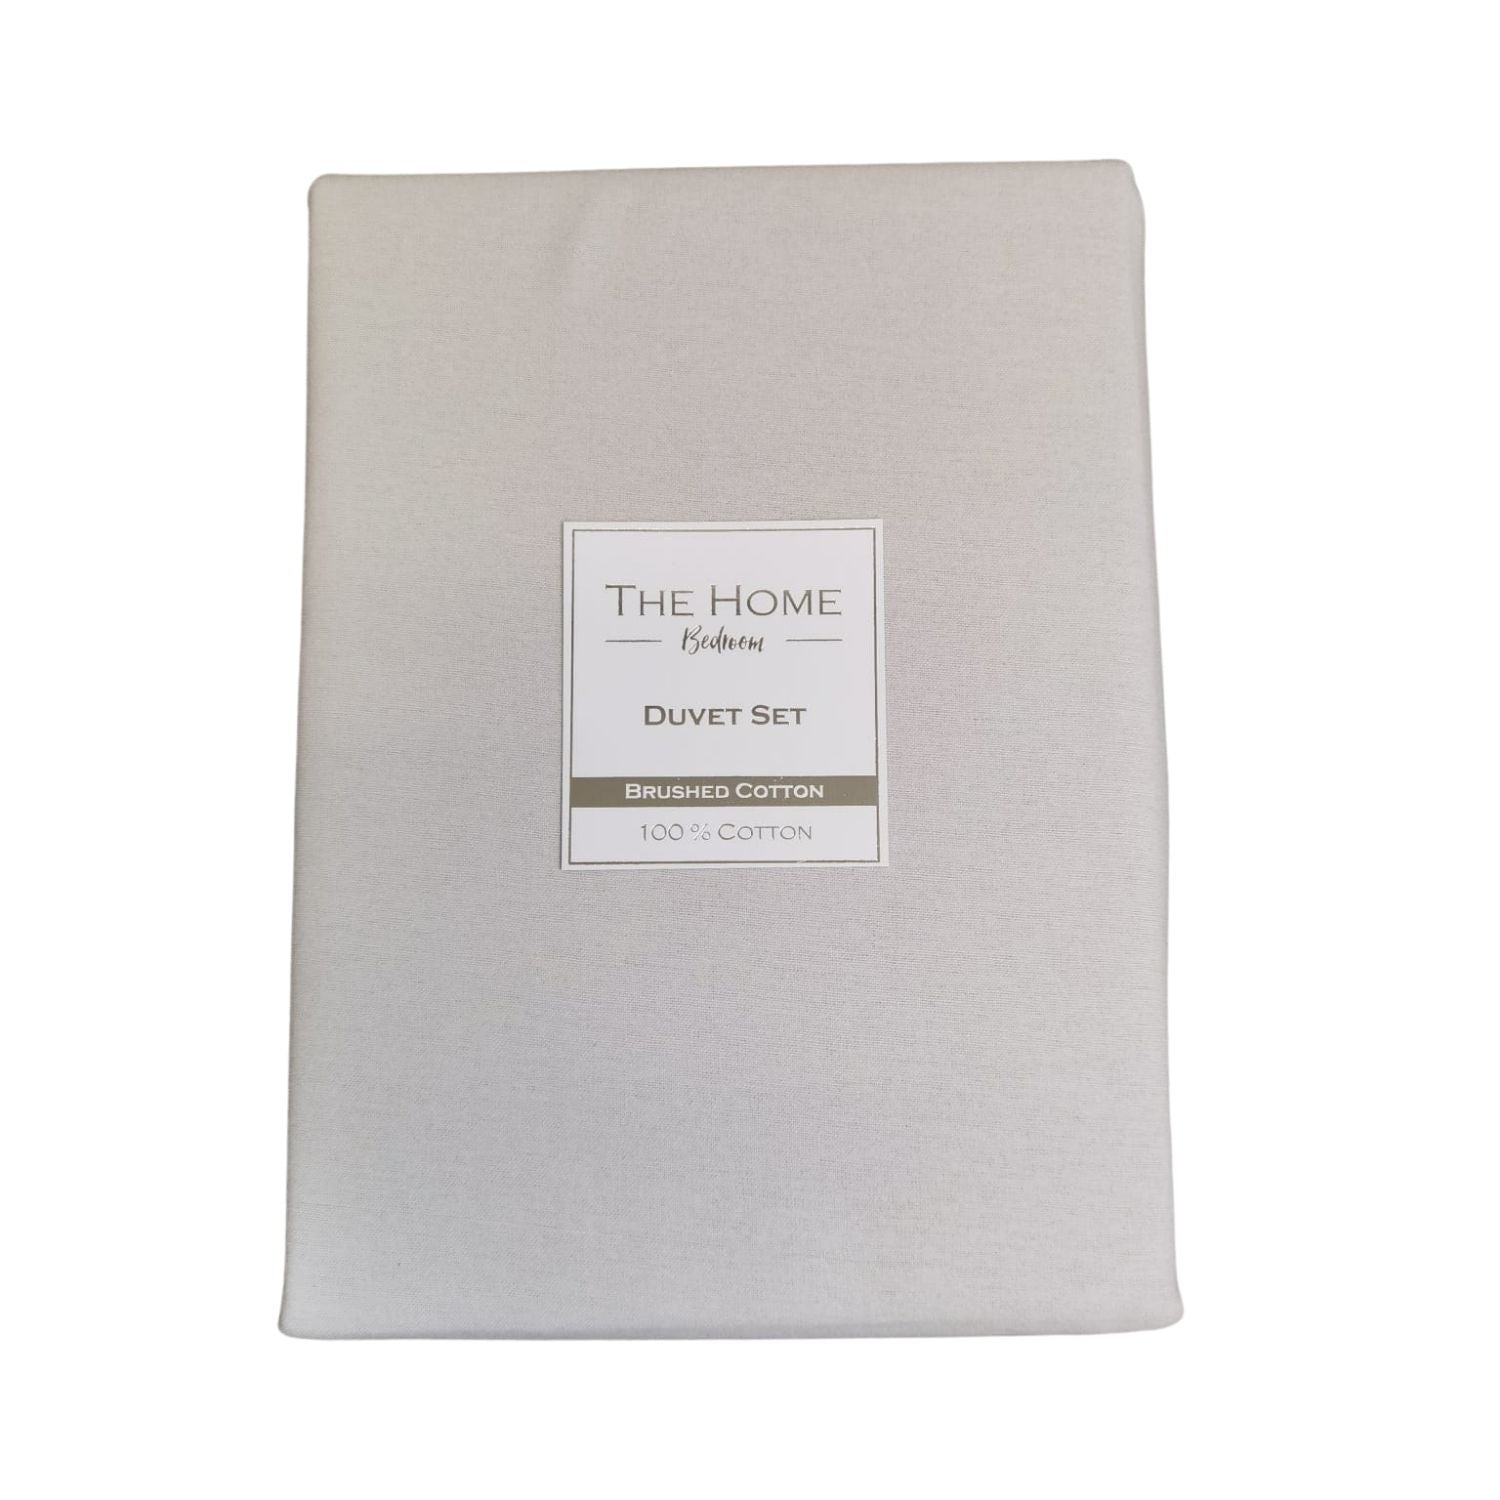  The Home Bedroom 100% Brushed Cotton Duvet Cover Set - Grey 1 Shaws Department Stores